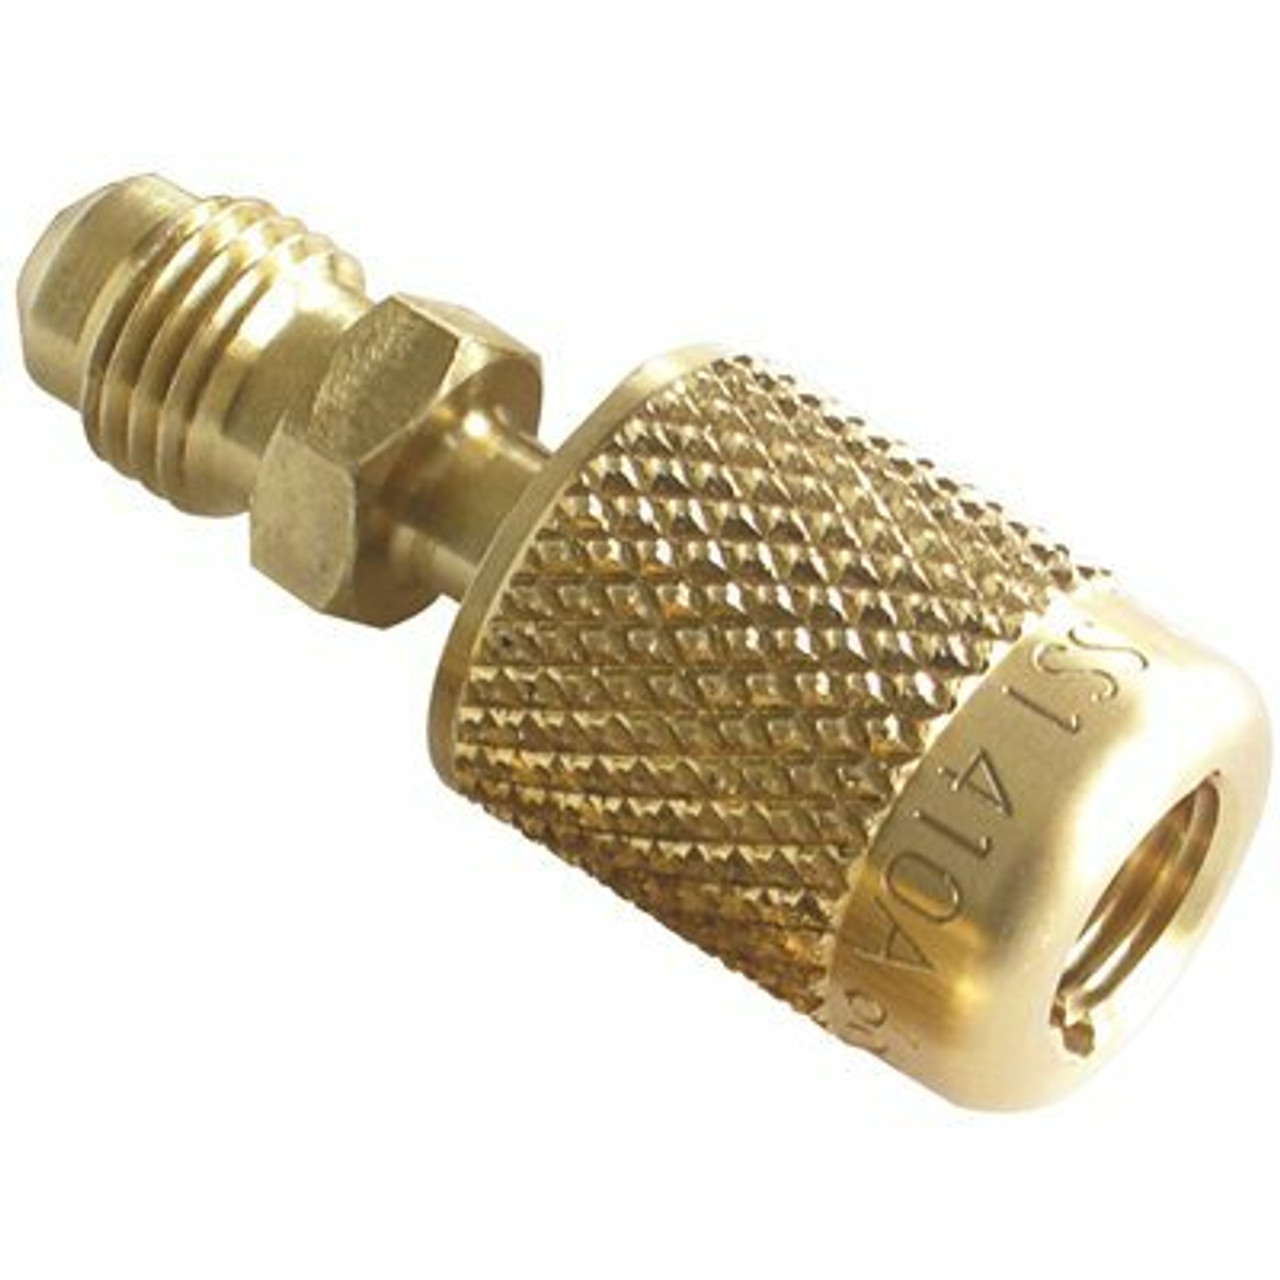 Jb Industries Quick Seal Fitting Adapter, Straight, 1/4 In.